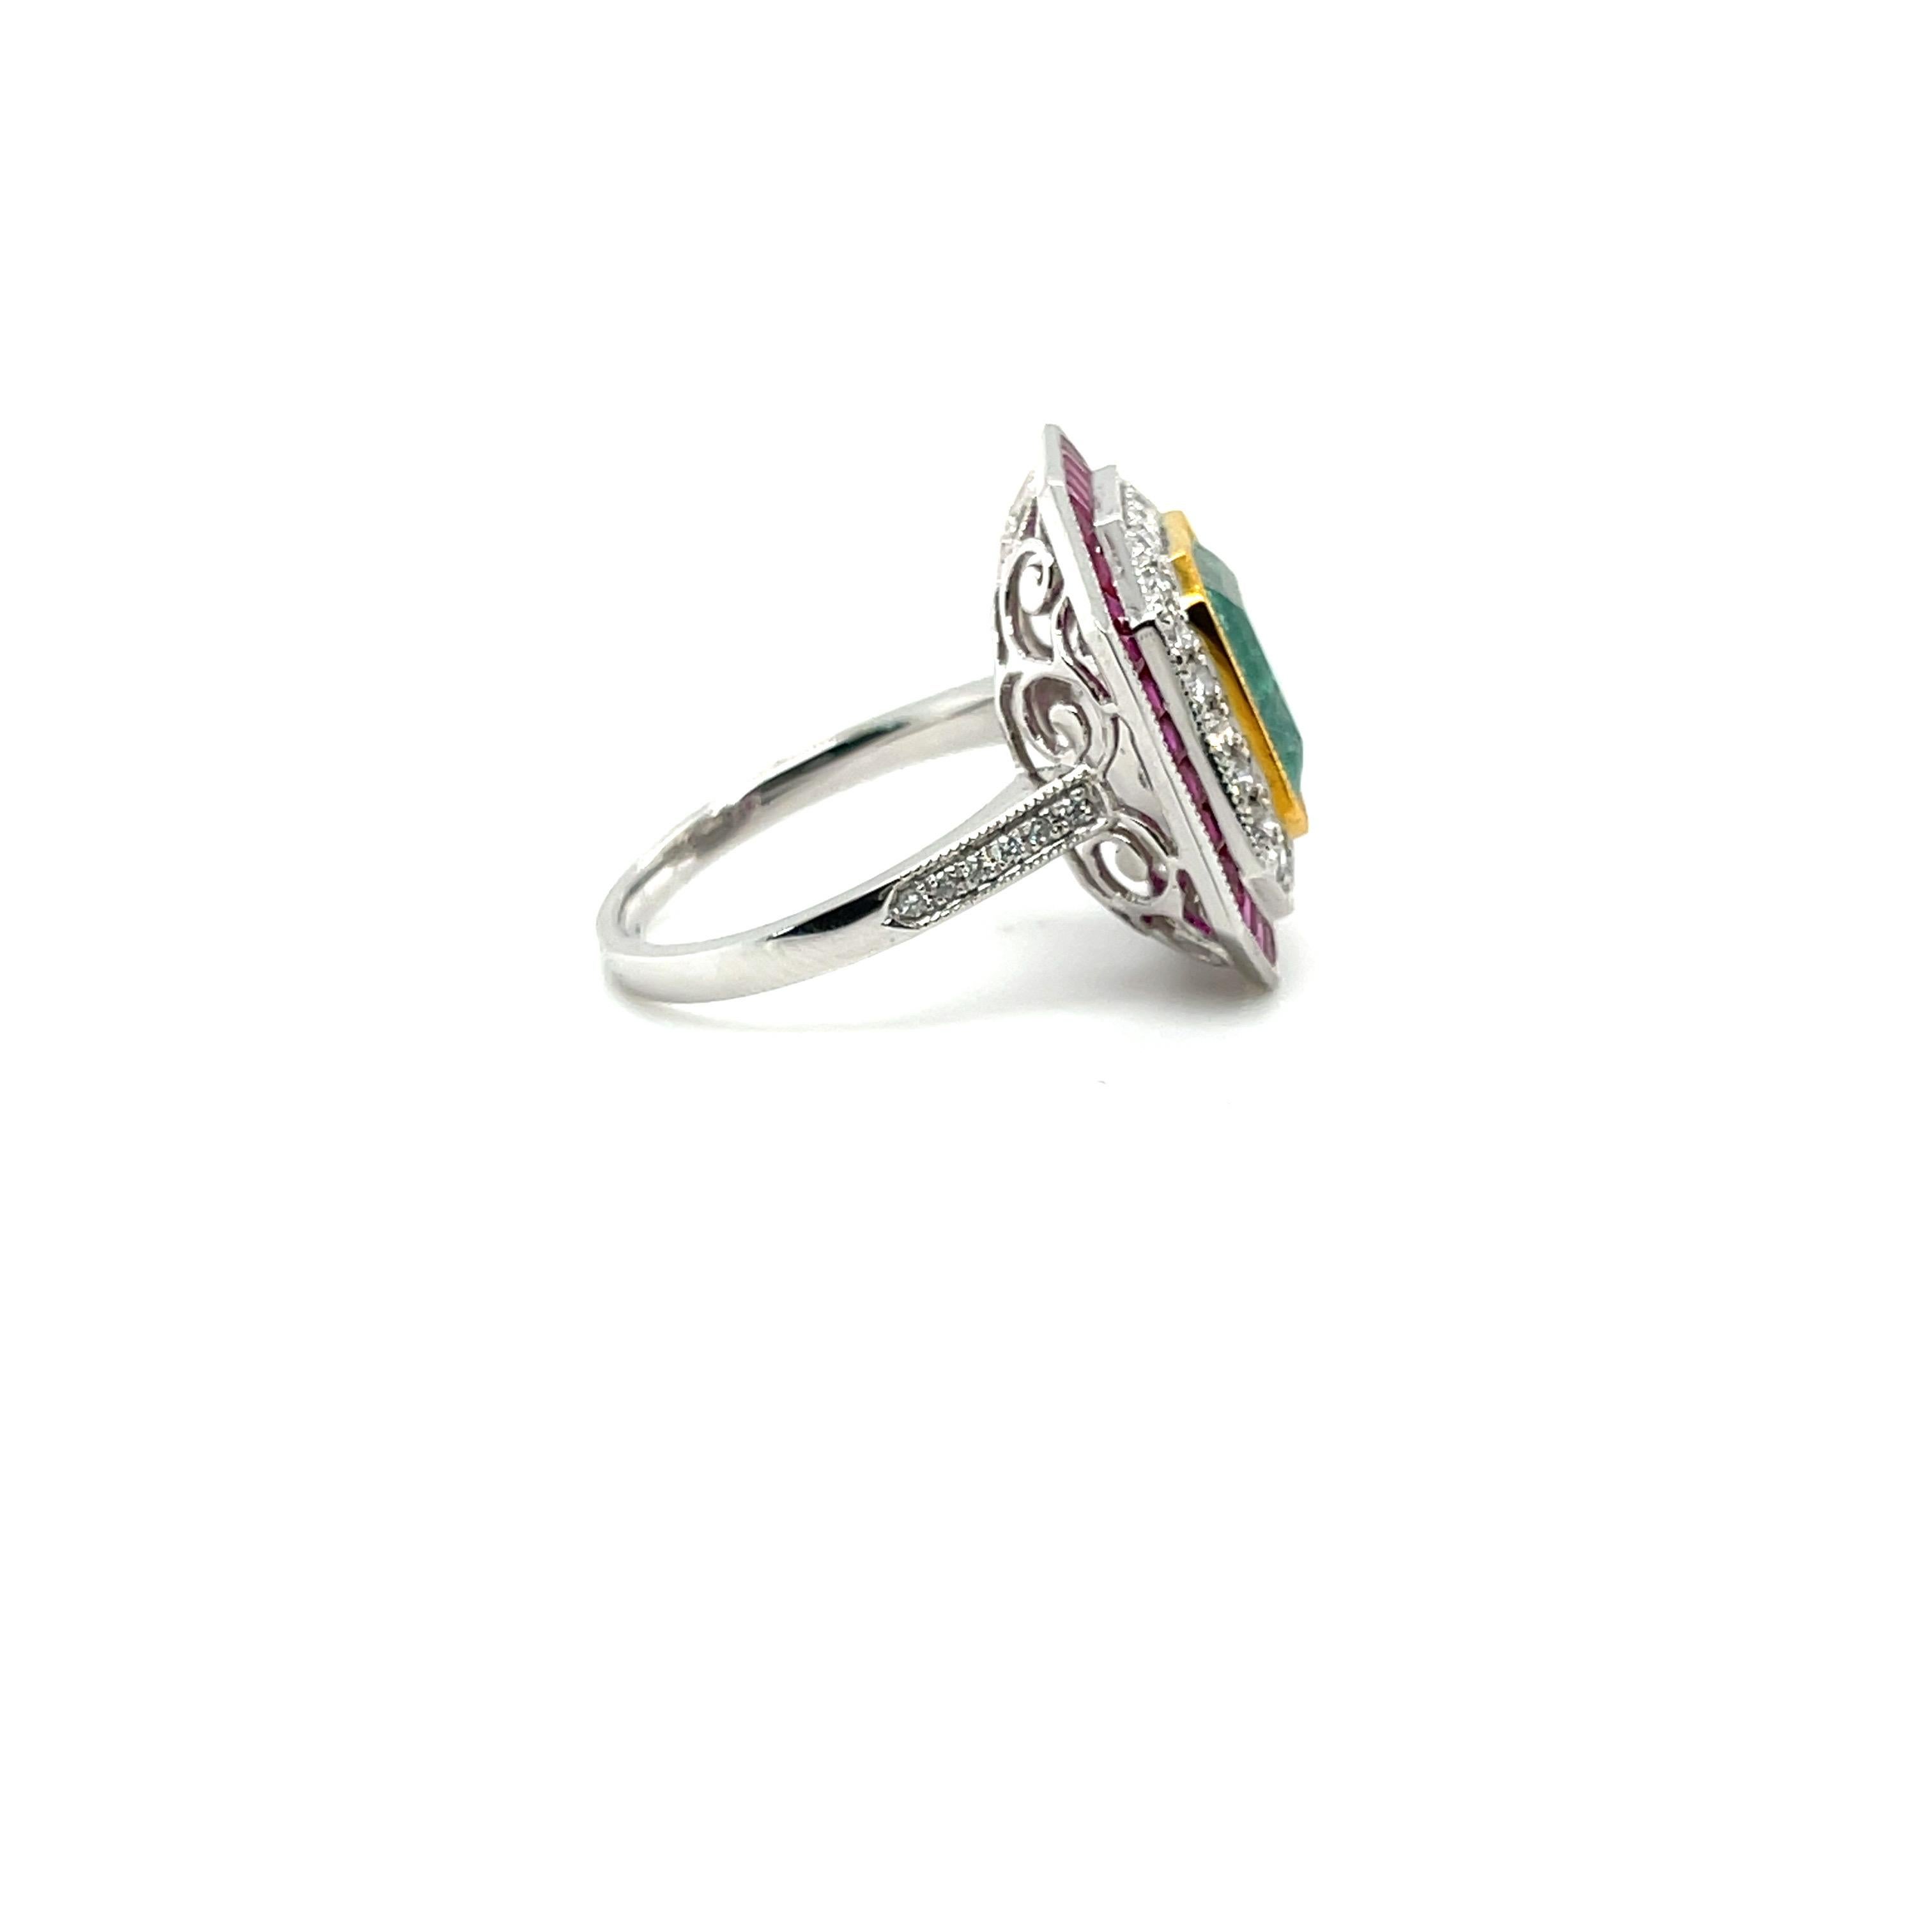 An absolutely gorgeous cocktail ring, featuring a stunning centre Colombian emerald, Natural diamonds and Rubies, gorgeously crafted in platinum, complimented by a stunning polished finish design.

Item 1
One ladies - platinum dress ring, narrow,